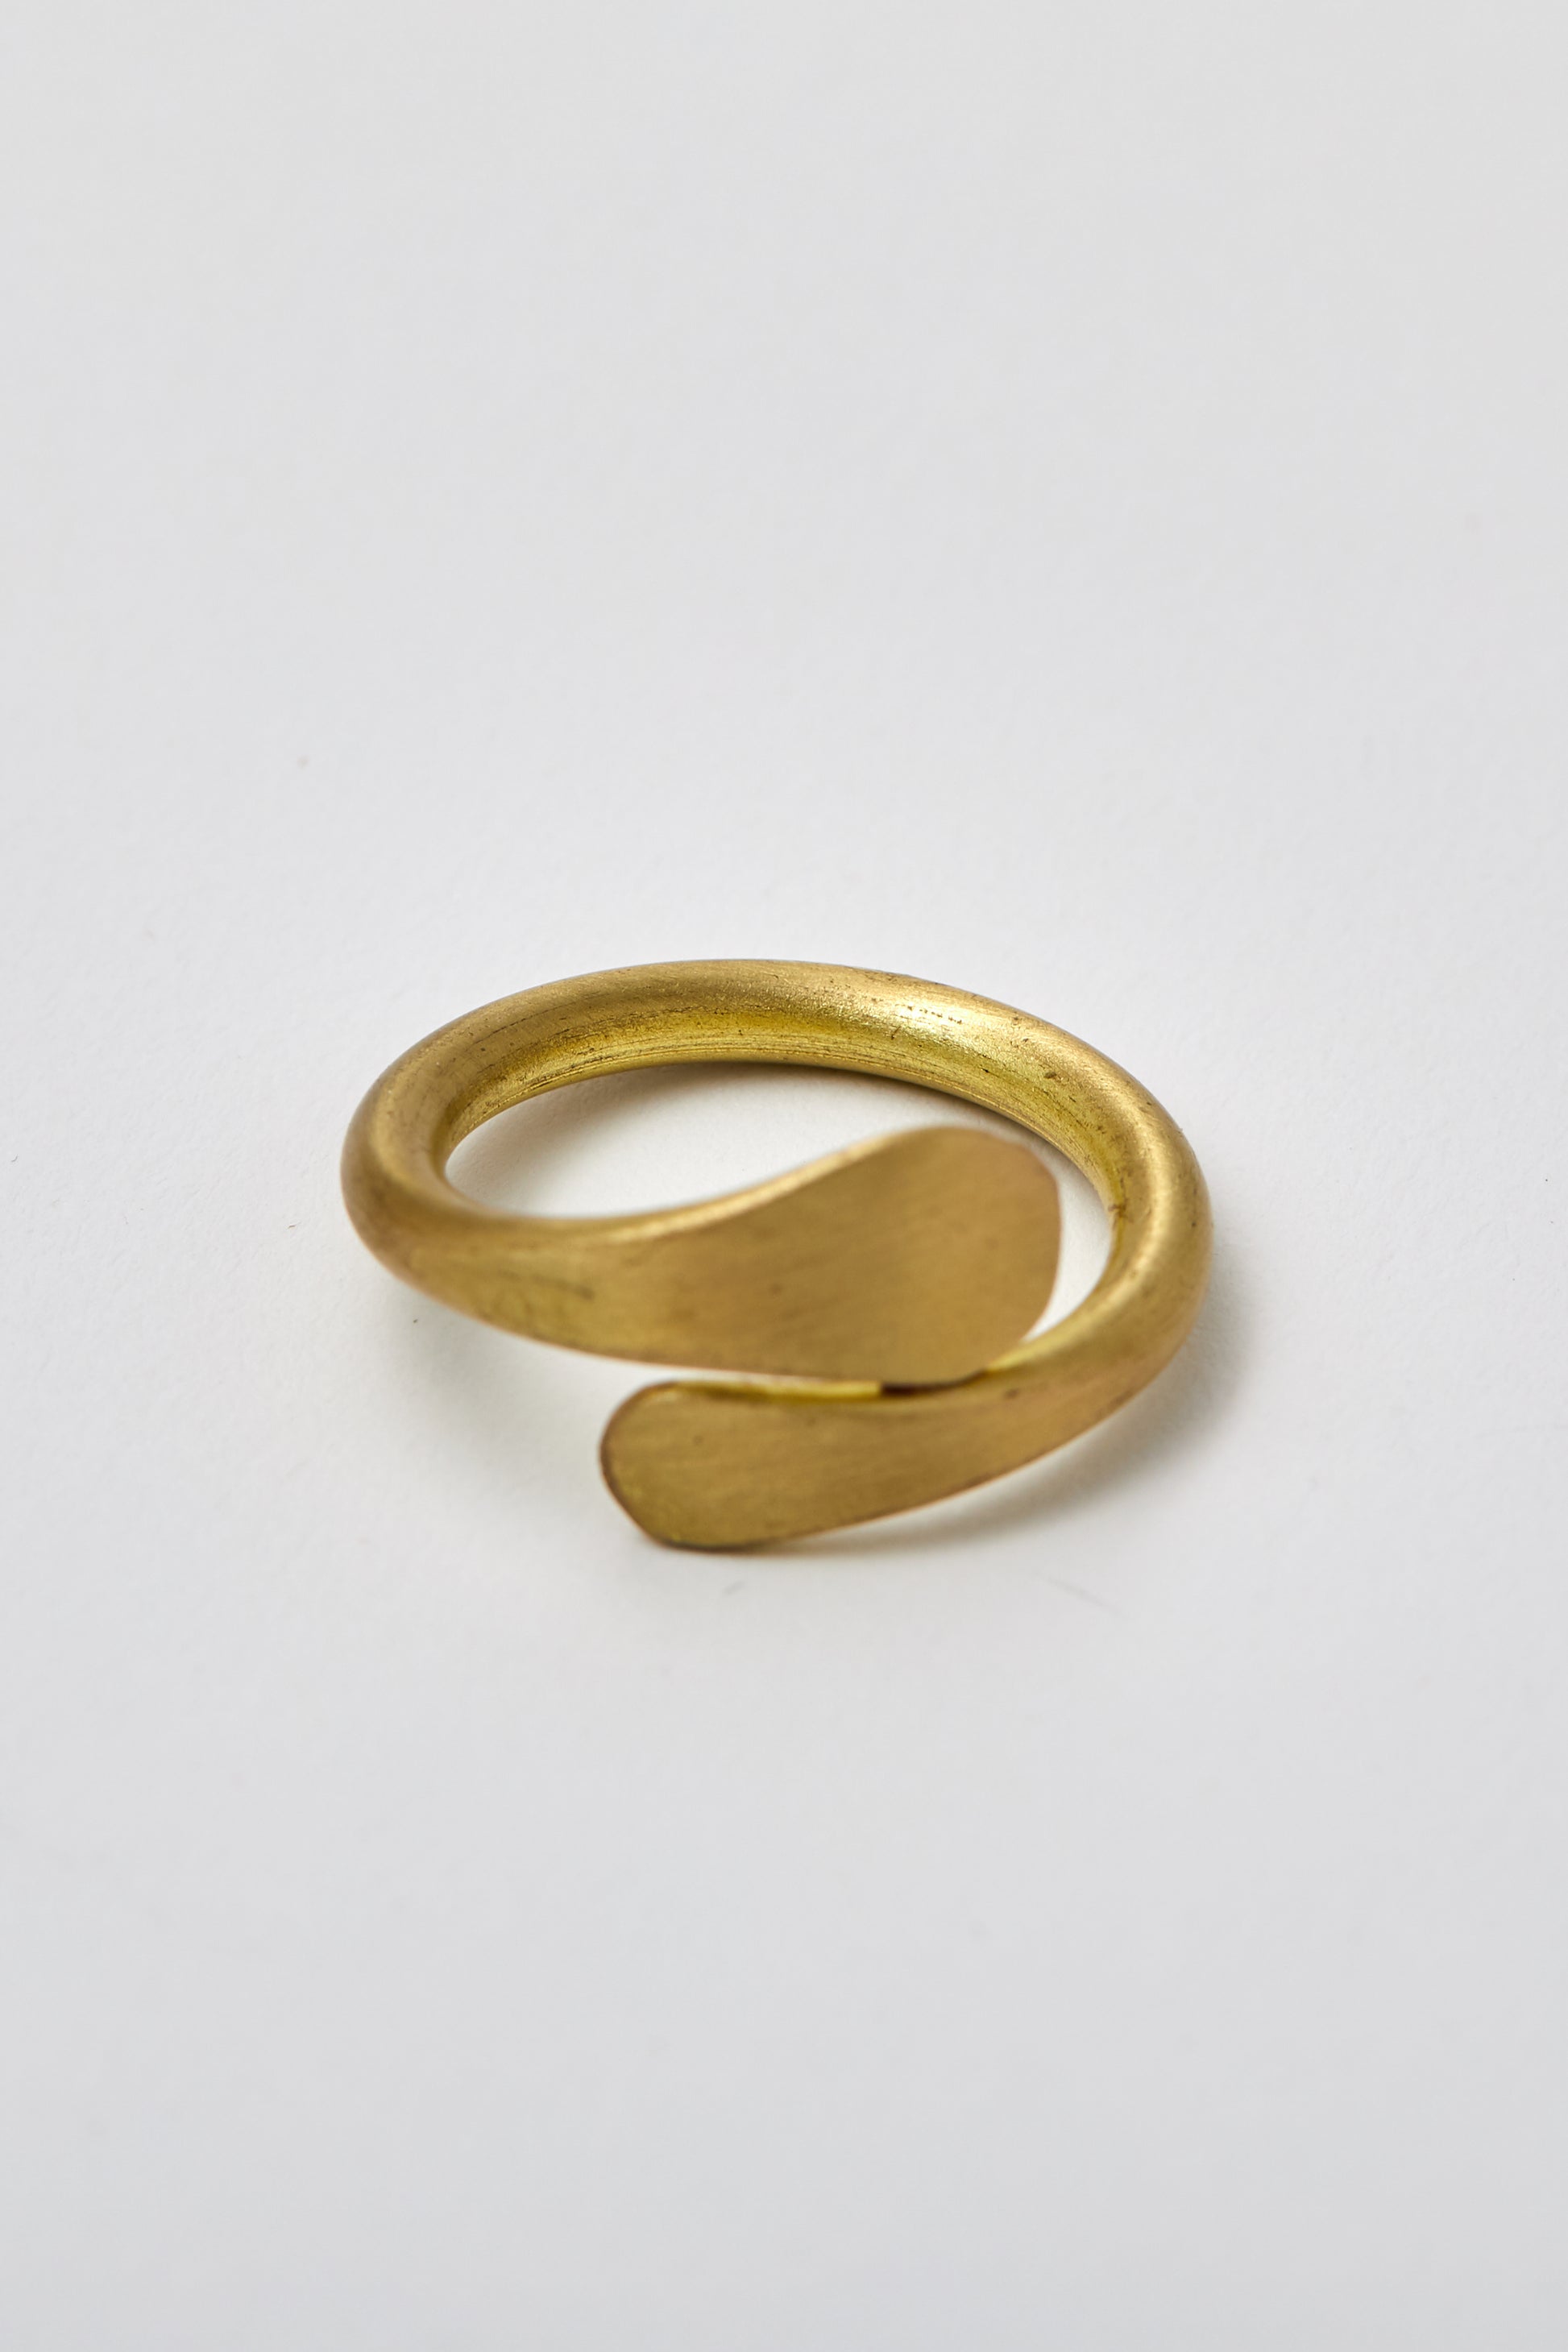 Worldfinds-Overlap-Ring-Gold